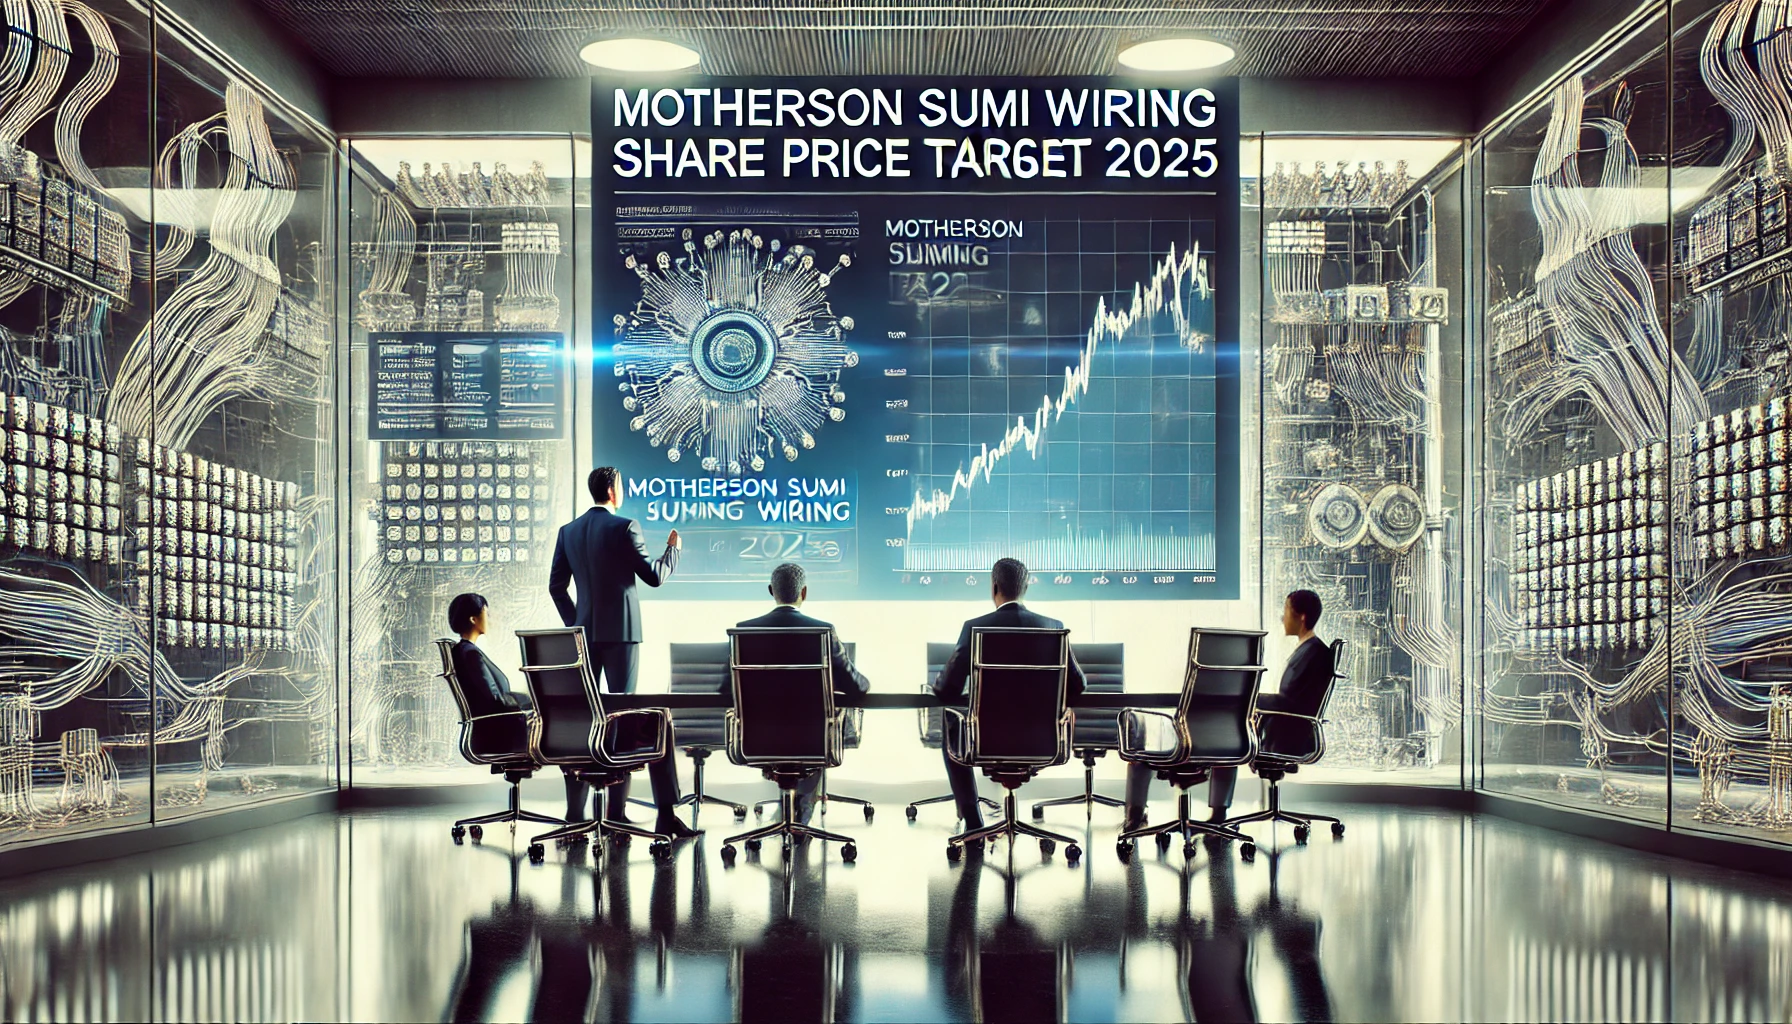 Motherson Sumi Wiring Share Price Target 2025